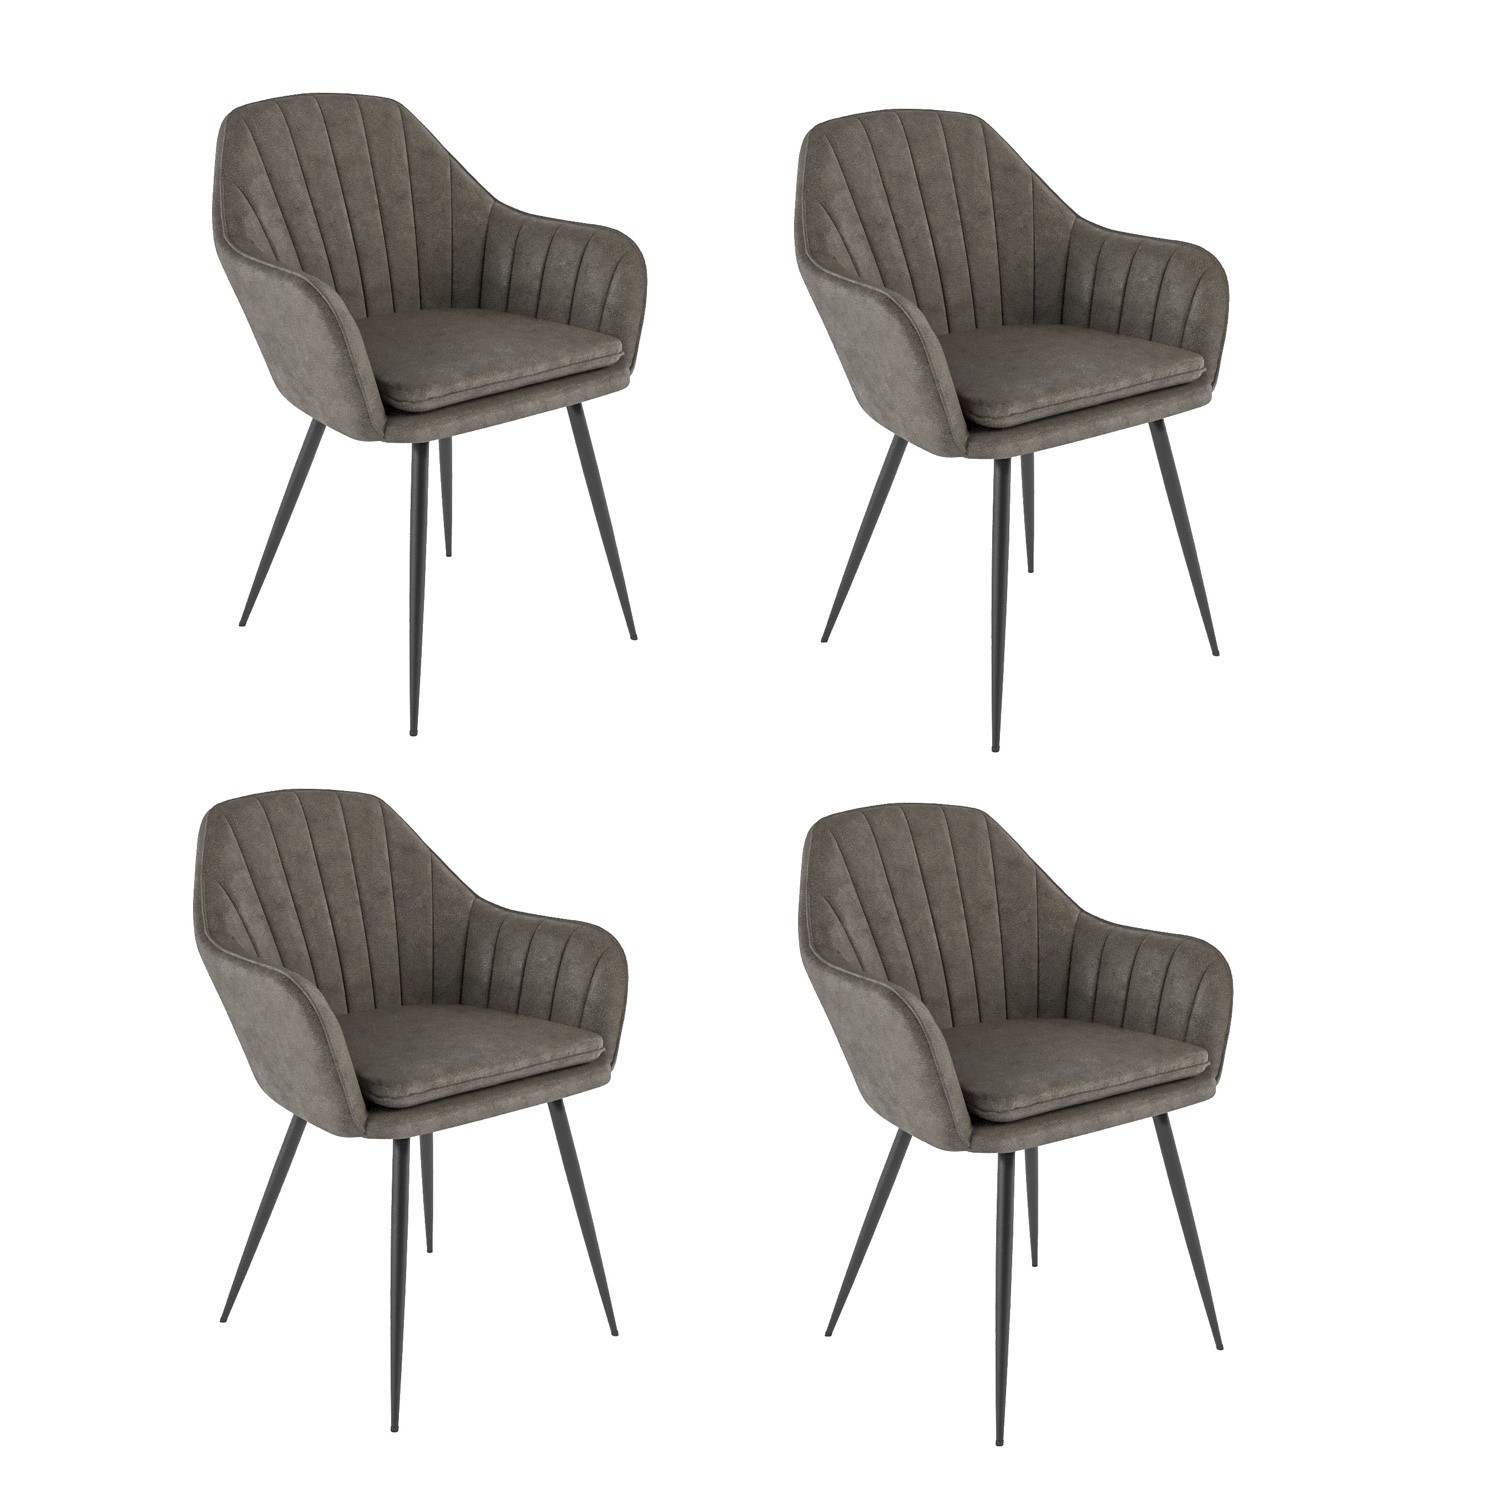 Photo of Set of 4 dove grey faux leather tub dining chairs - logan